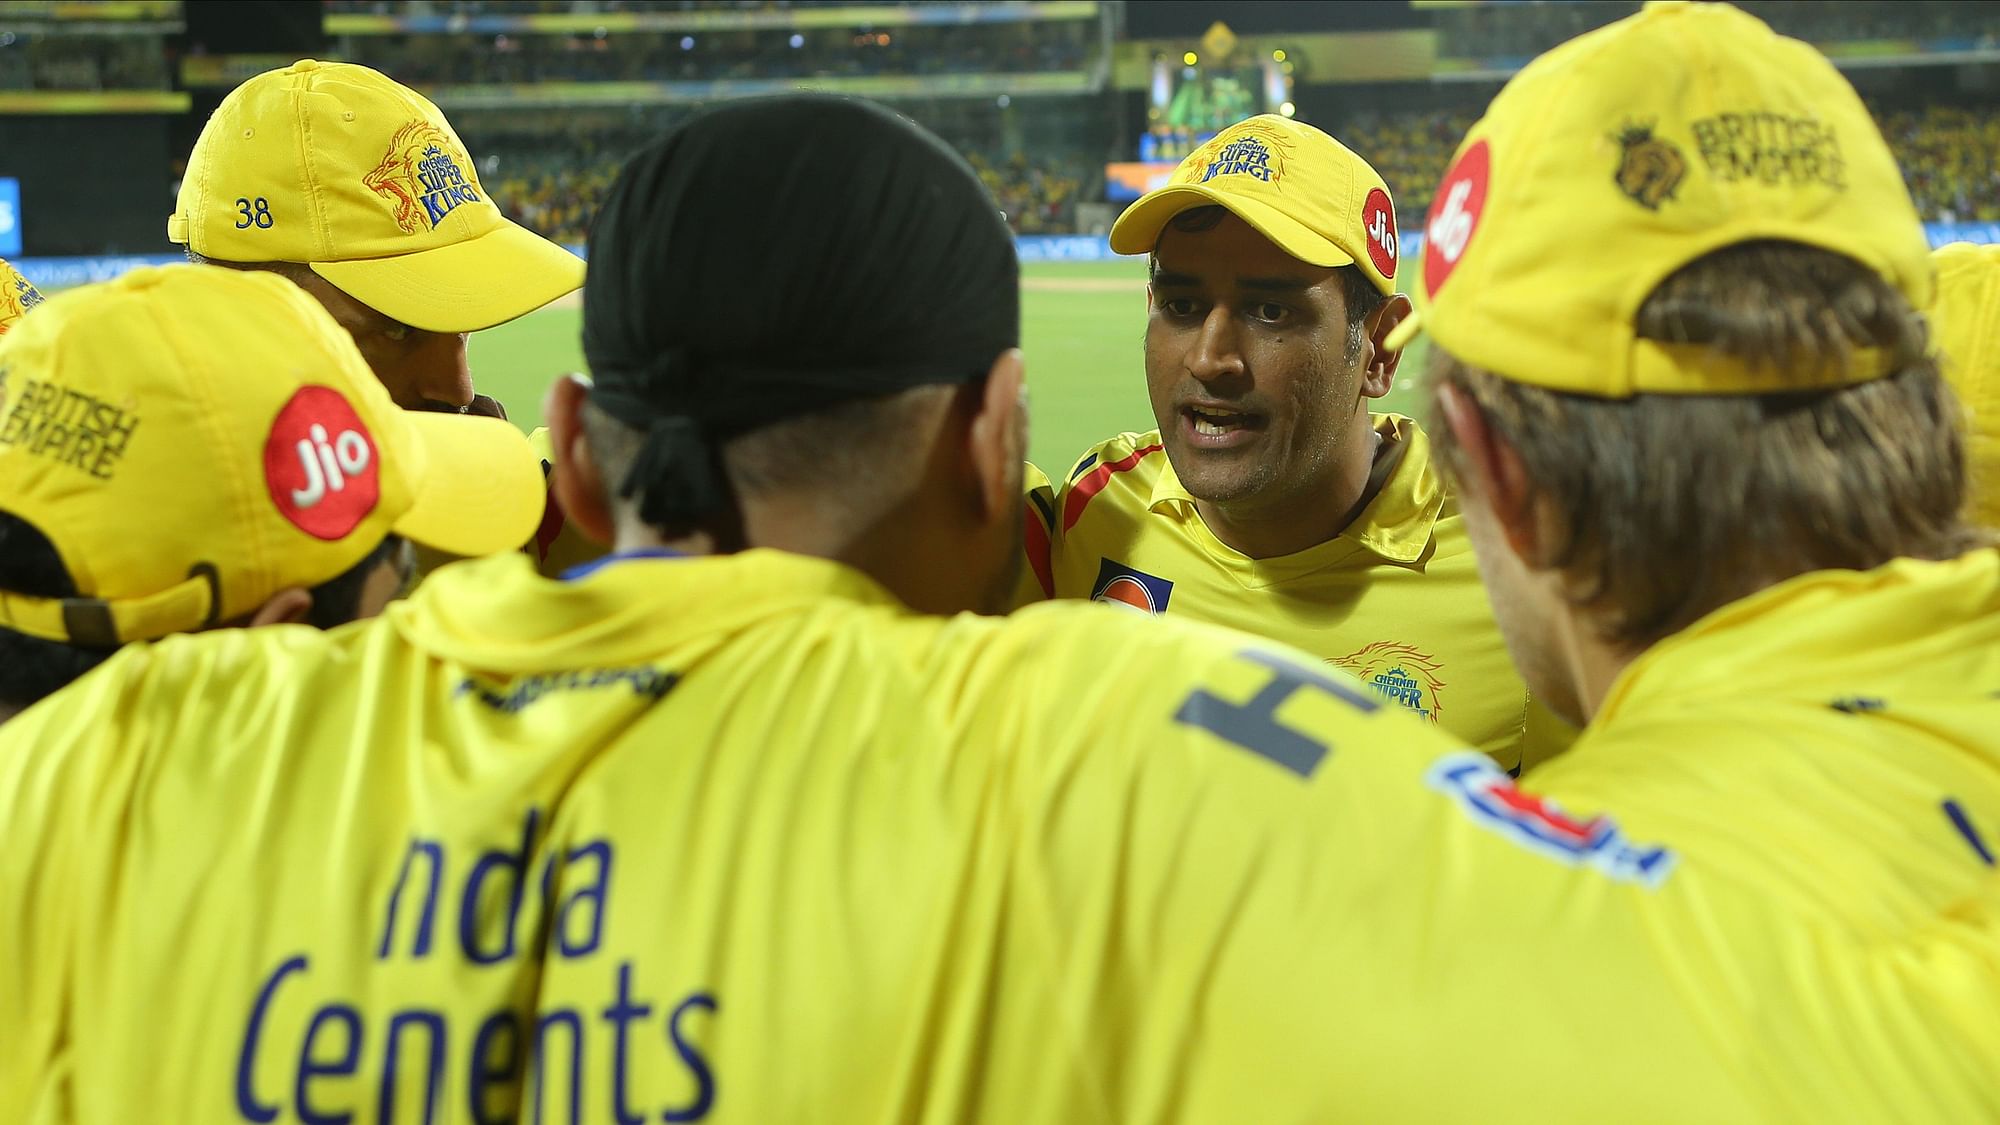 Chennai Super Kings’ success mantra is a “trade secret” revealing which could leave Mahendra Singh Dhoni unsold at the IPL auctions.